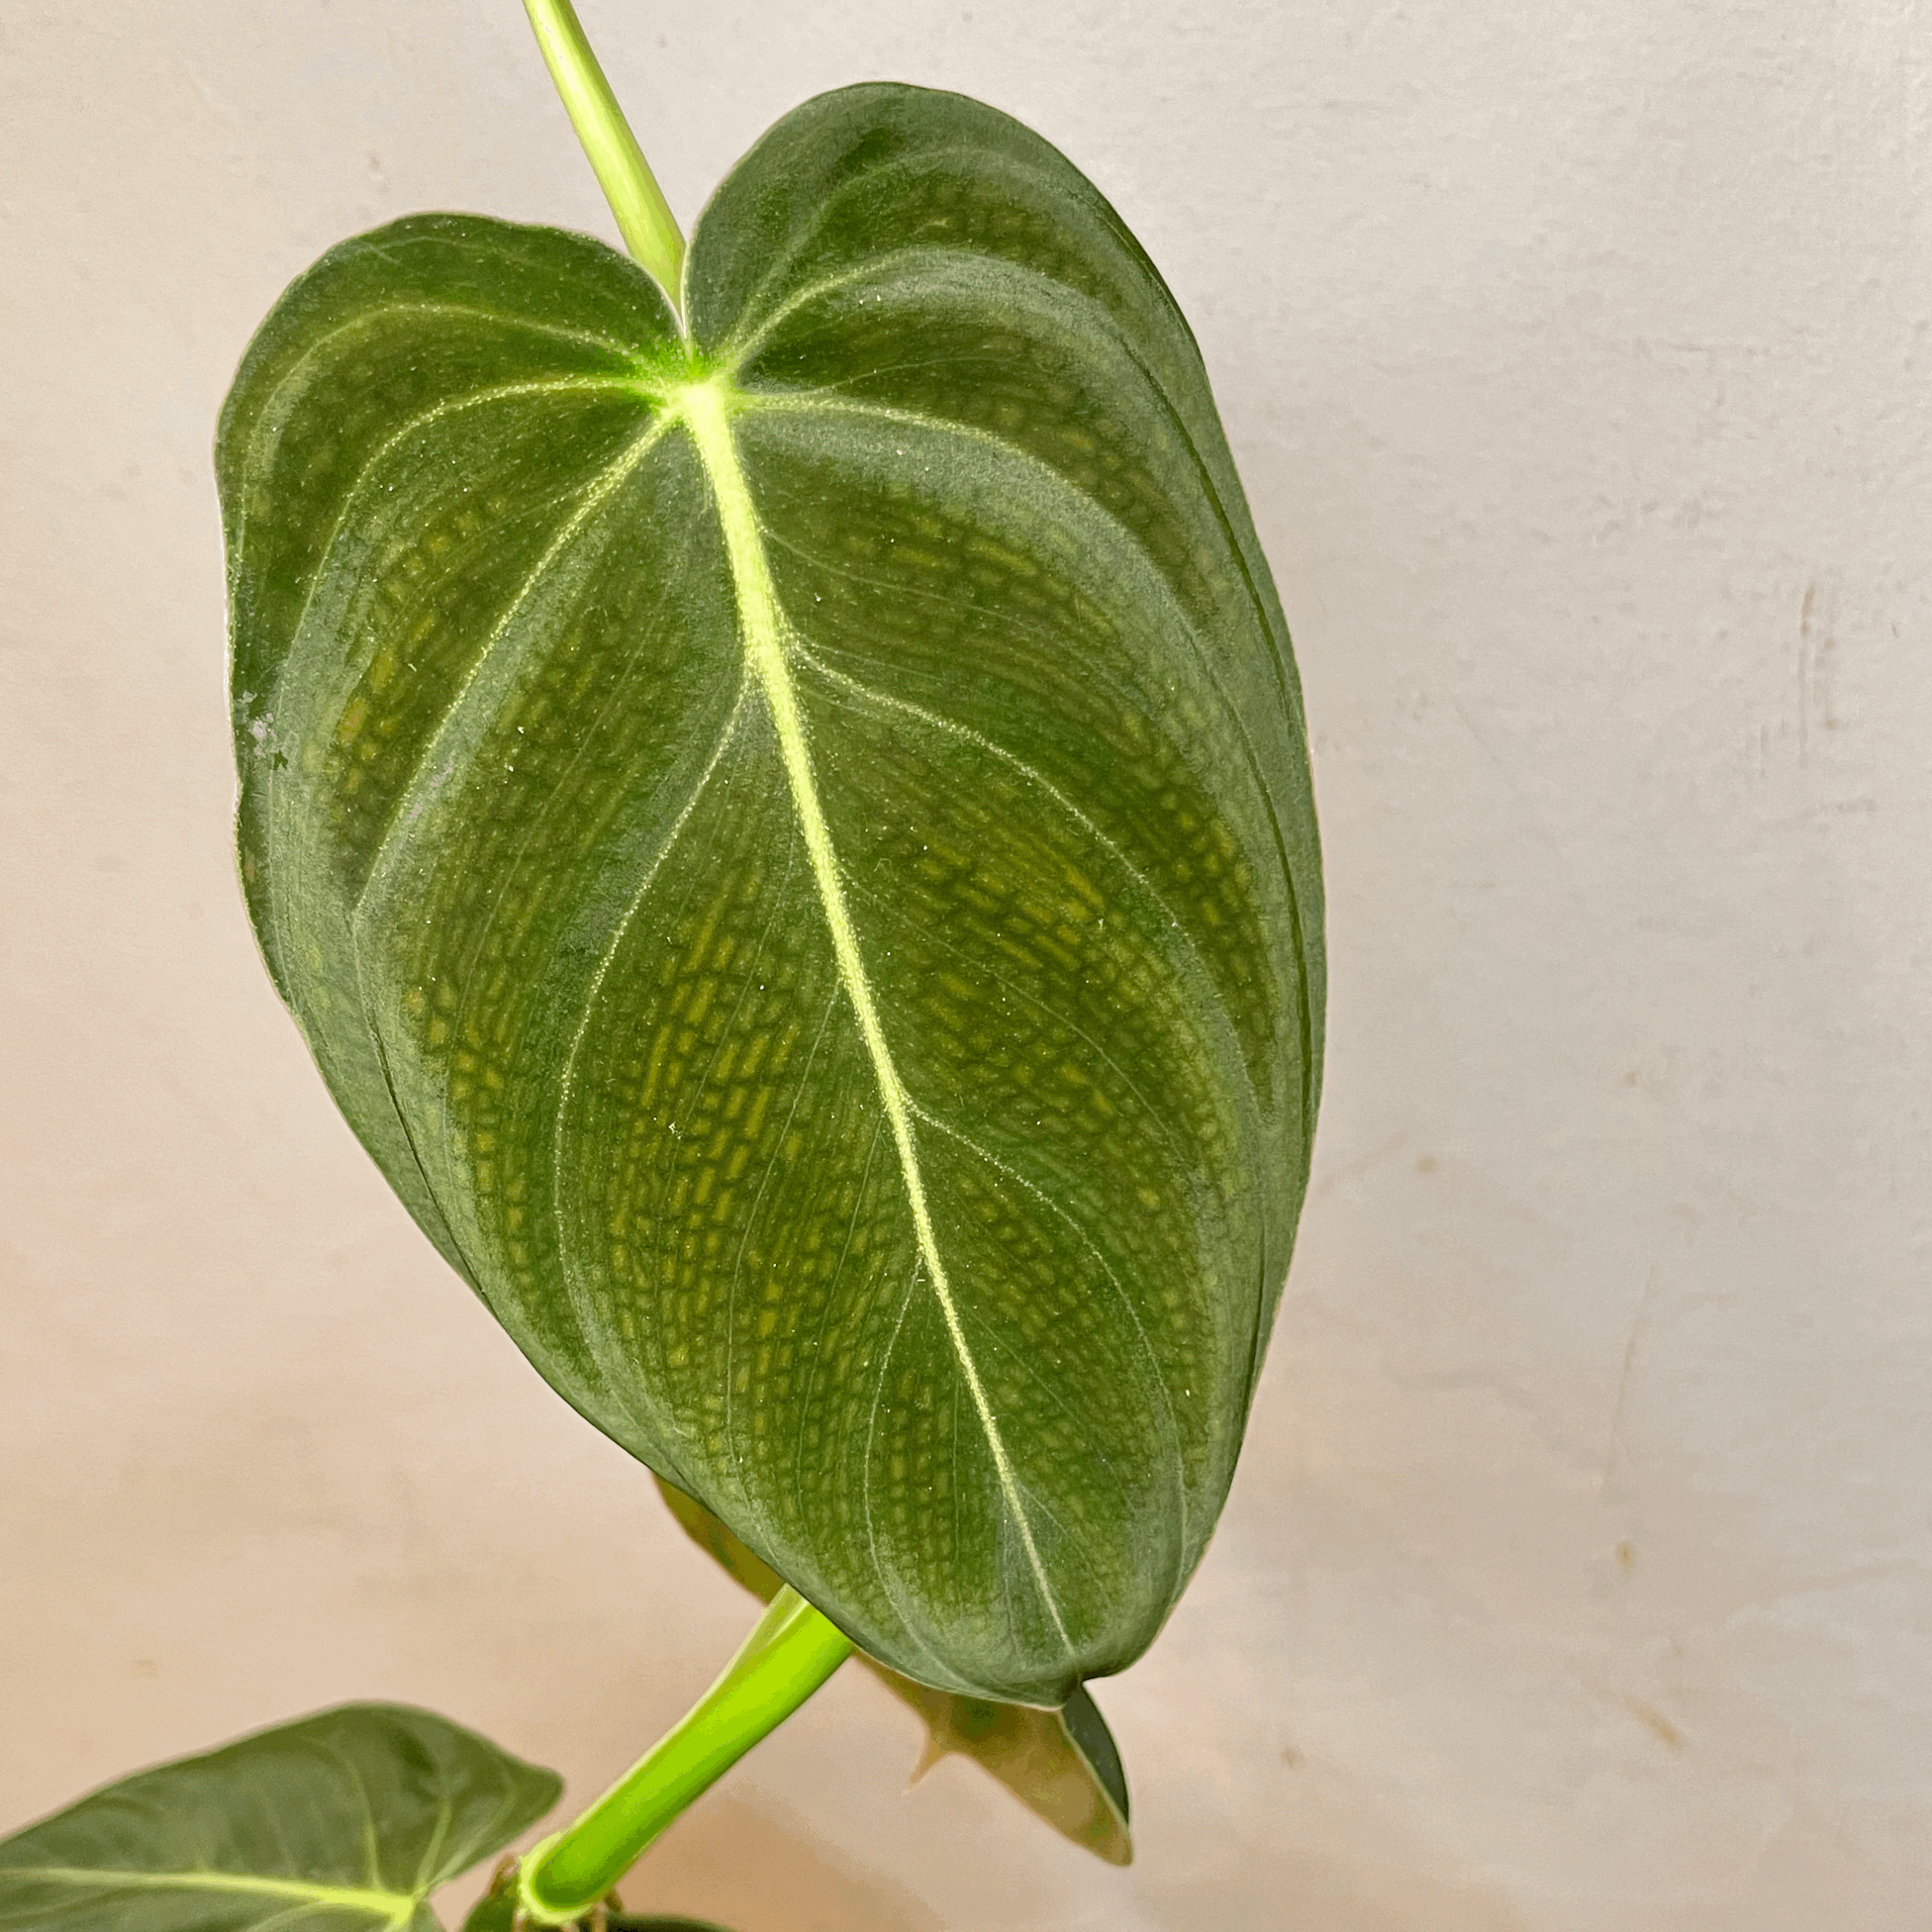 Philodendron melanochrysum (Black-gold Philodendron)